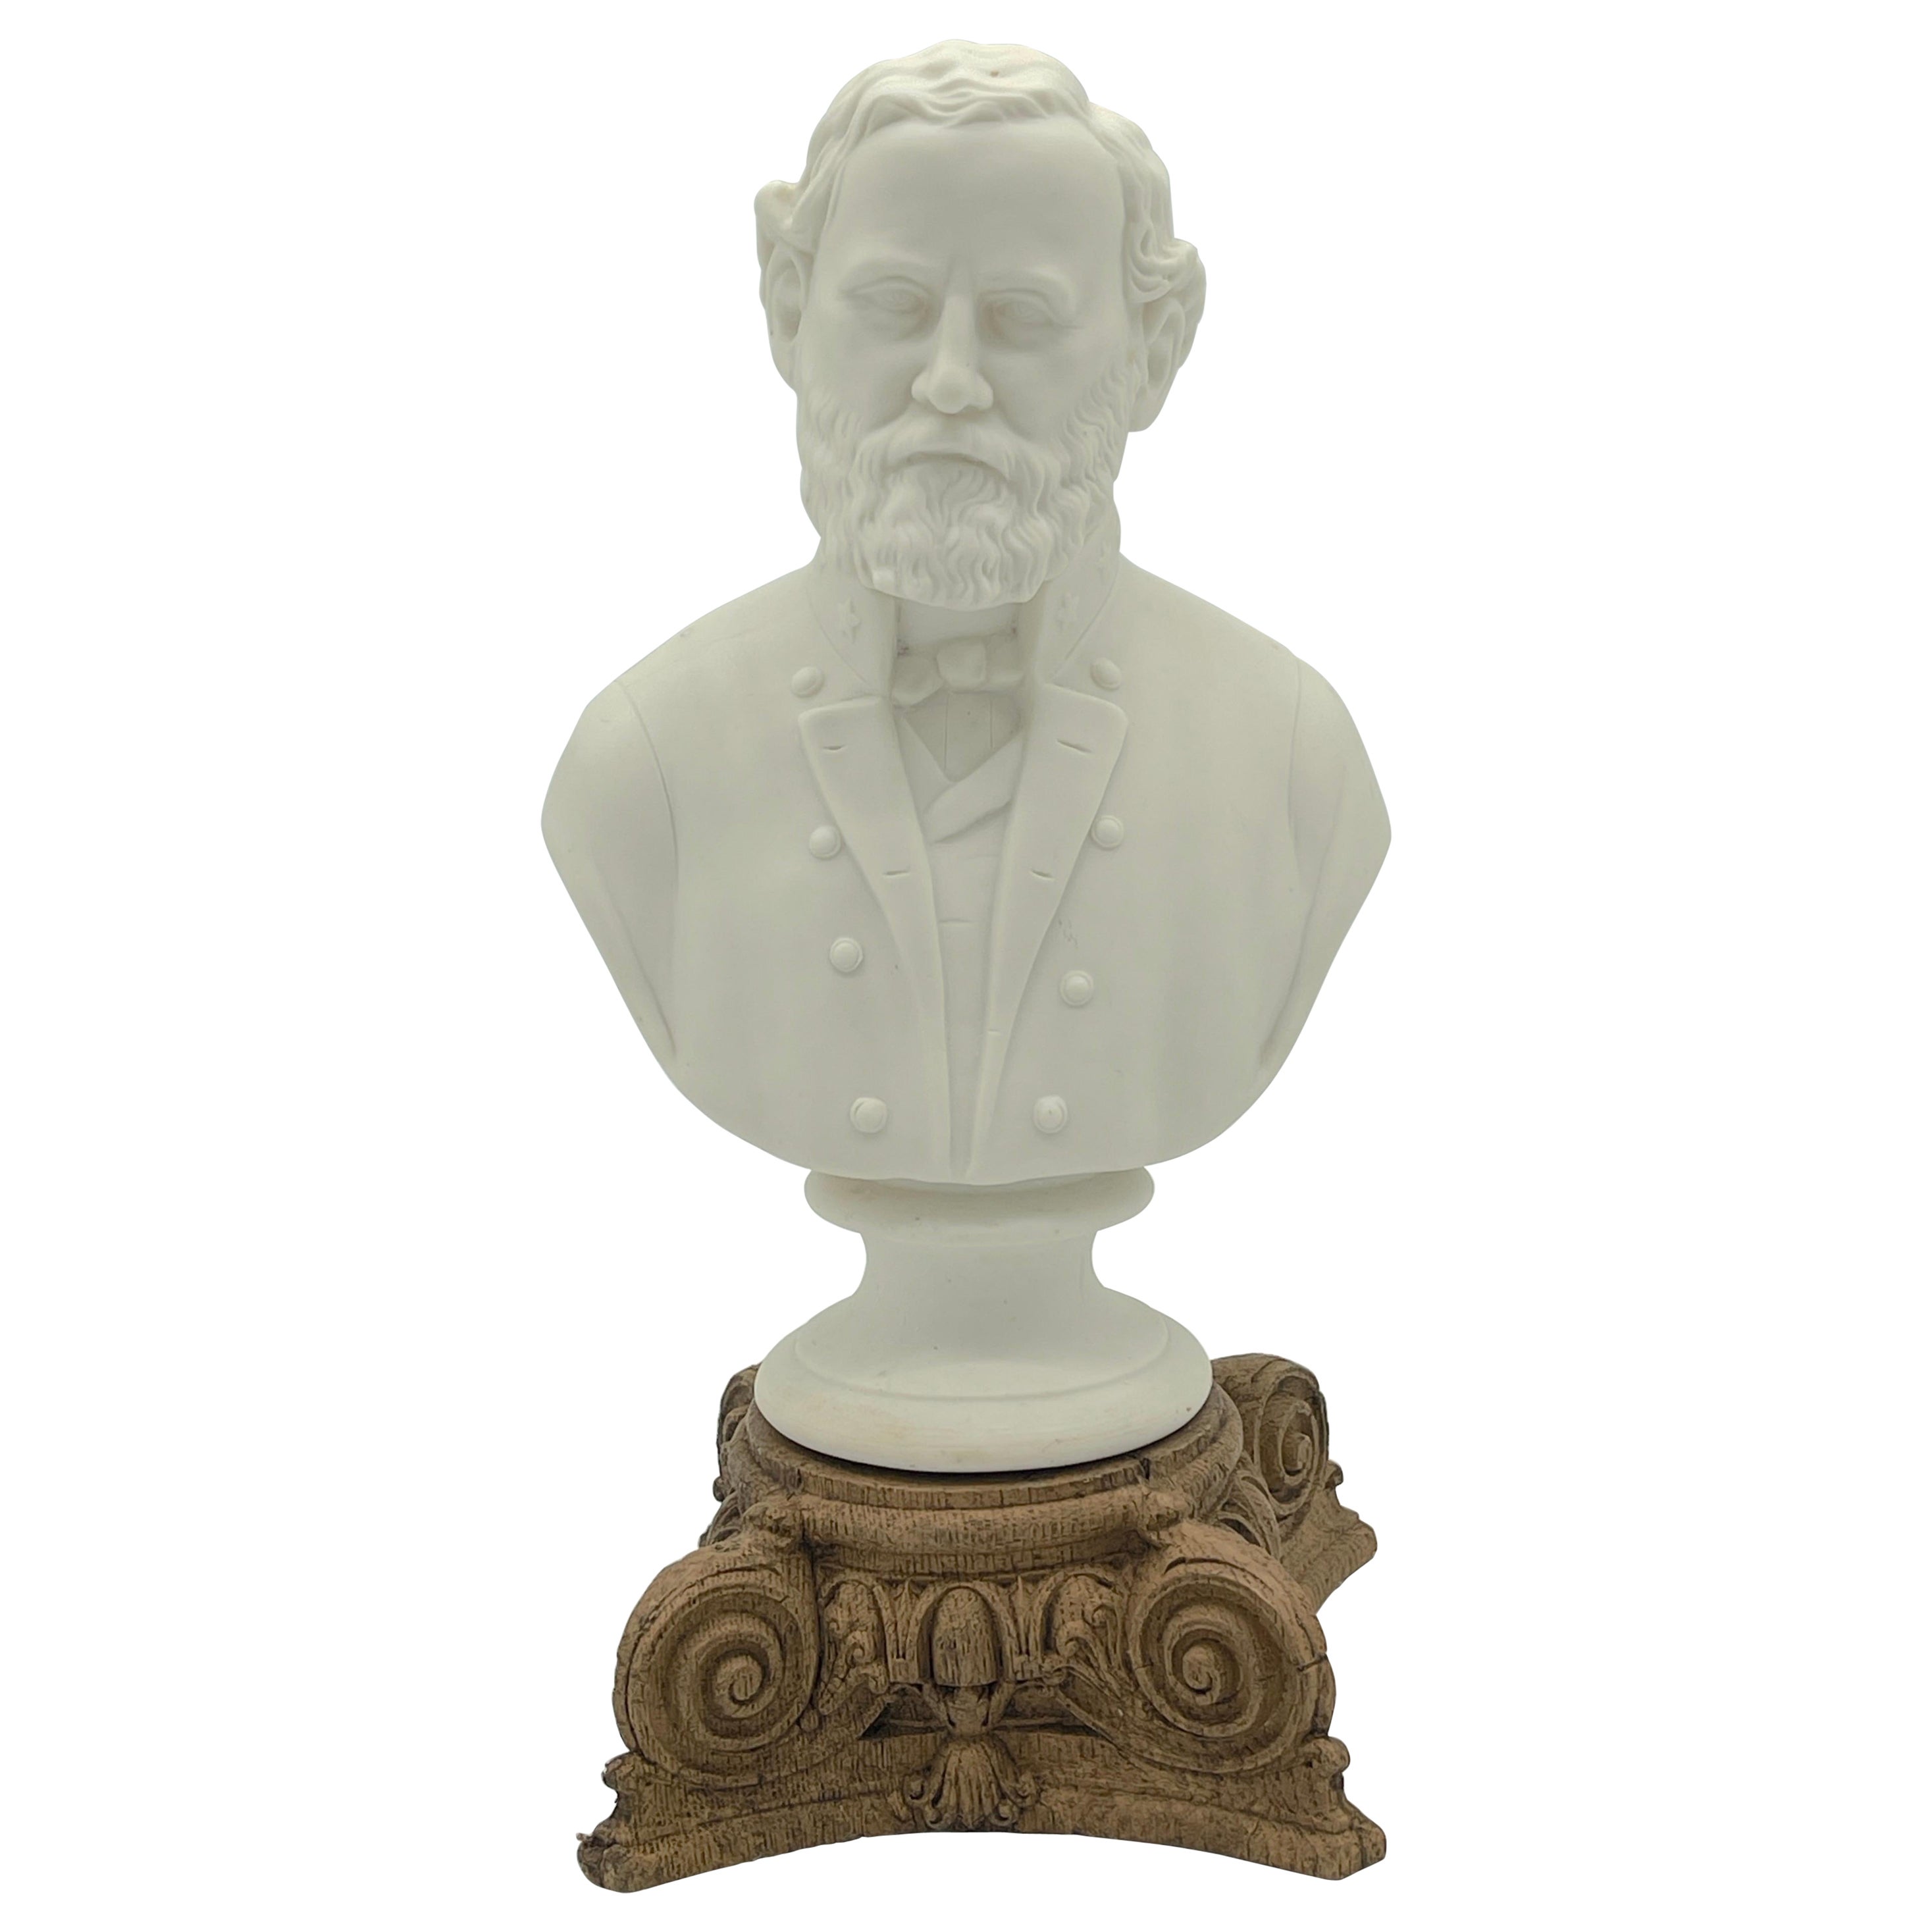 Parian Bust of Confederate General Robert E. Lee on Carved Neoclassical Base